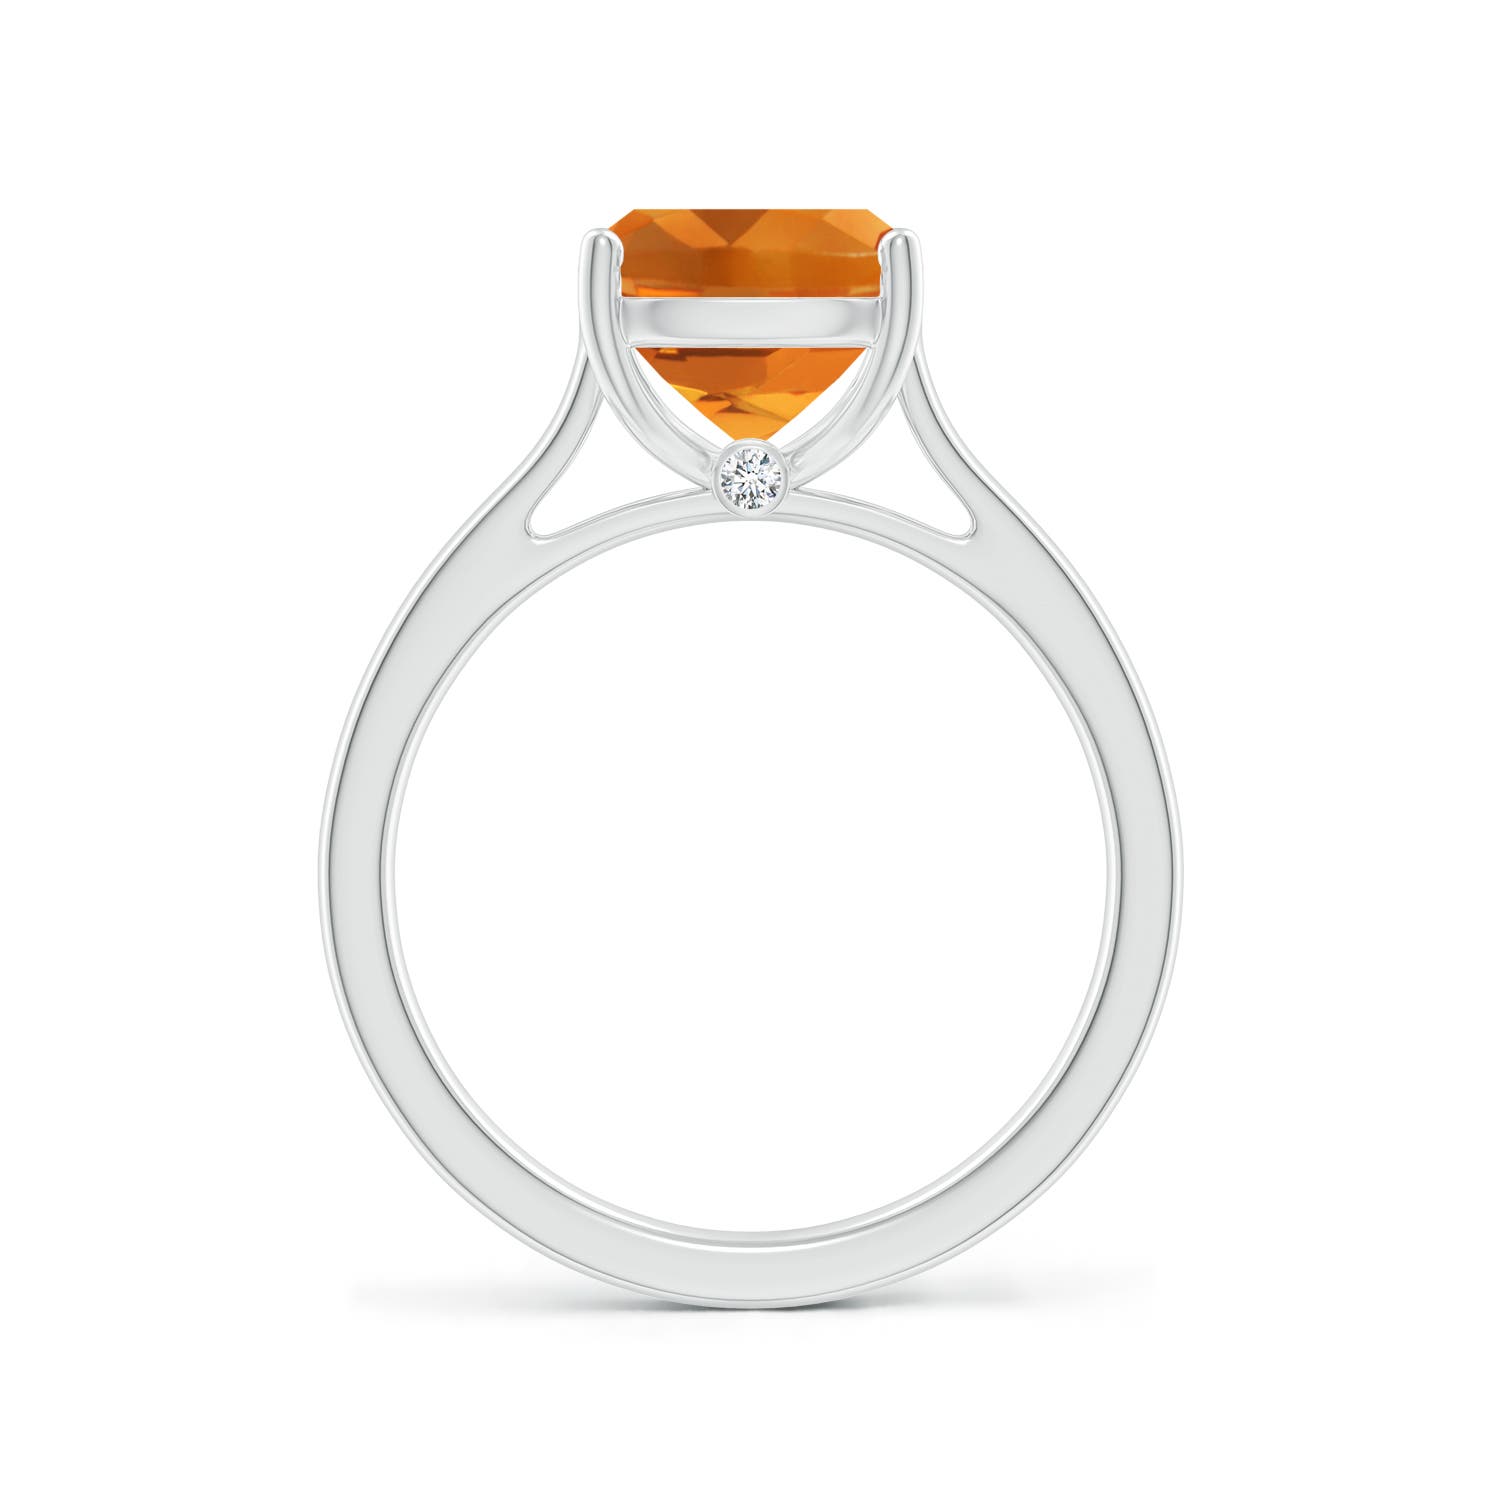 AAA - Citrine / 2.67 CT / 14 KT White Gold